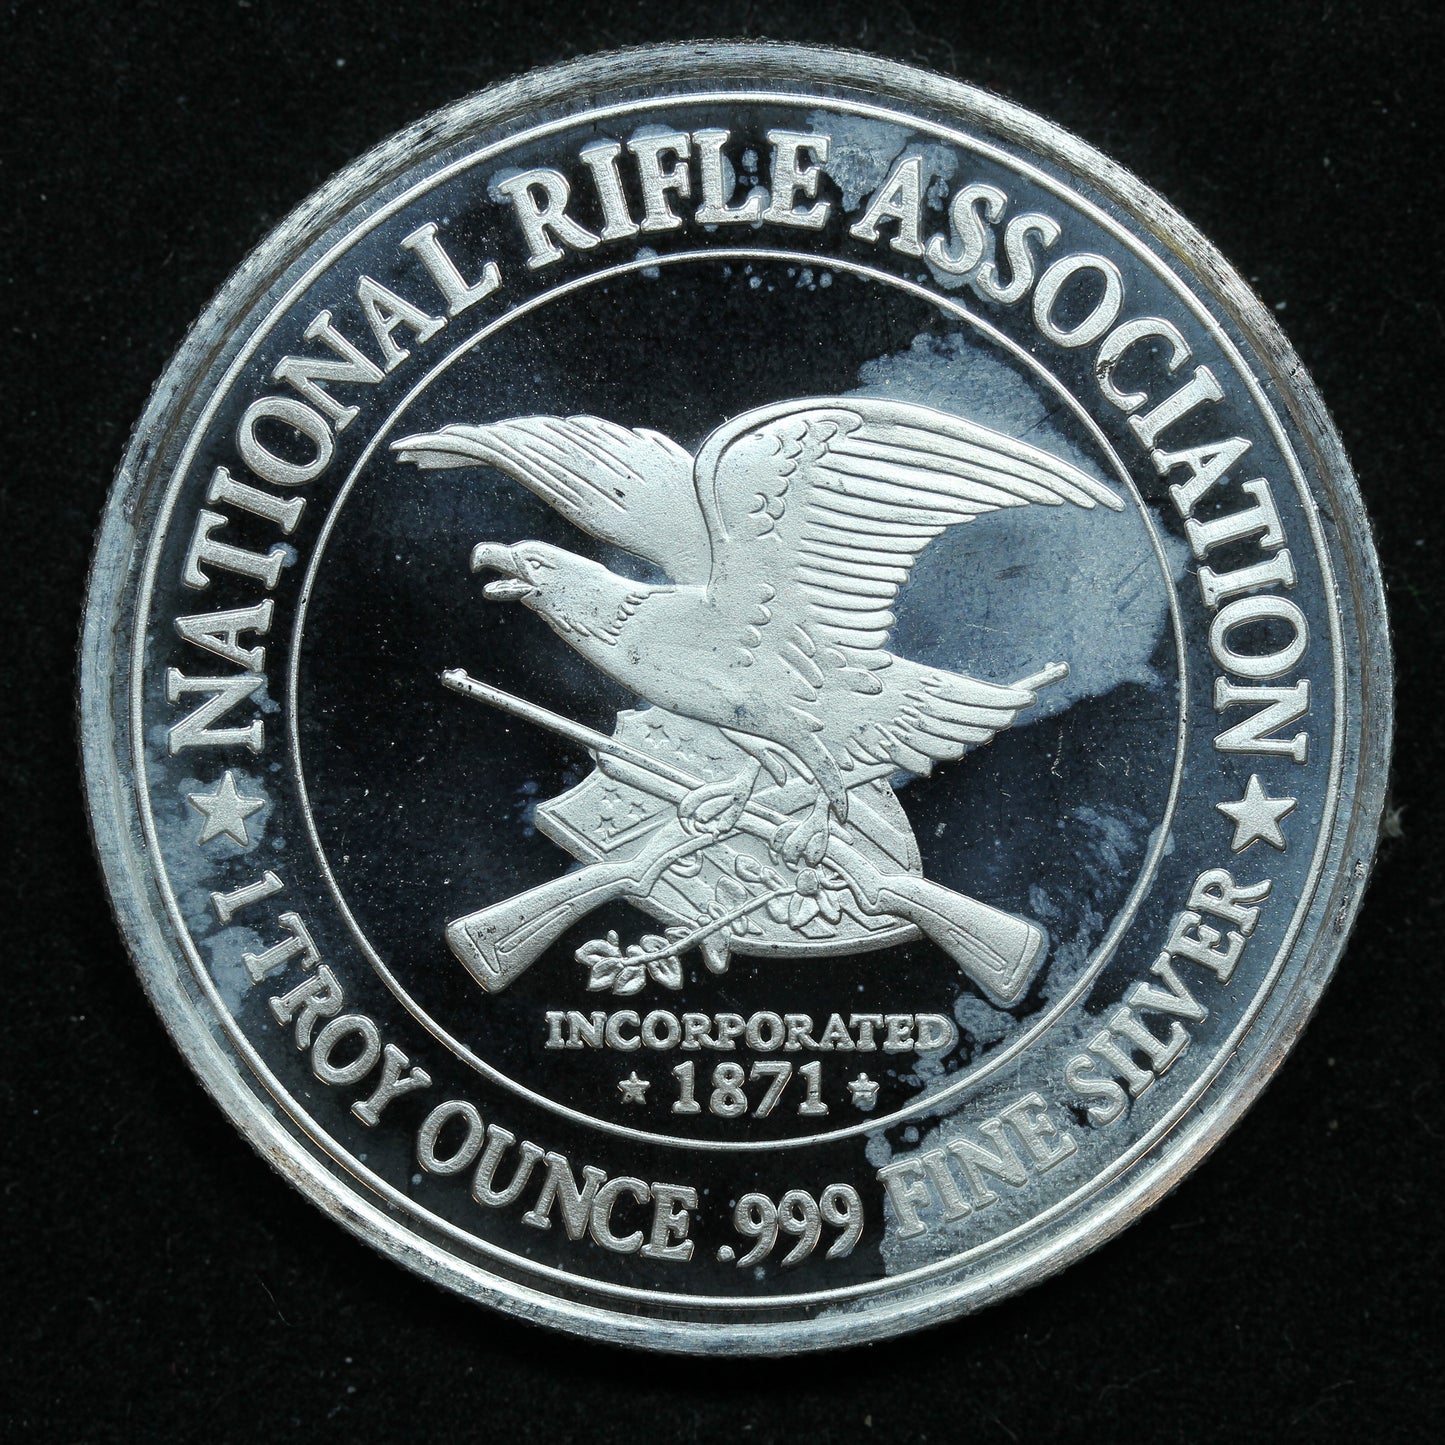 2018 1 oz Silver Round - NRA Right to Keep & Bear Arms 2nd Amendment - Spots